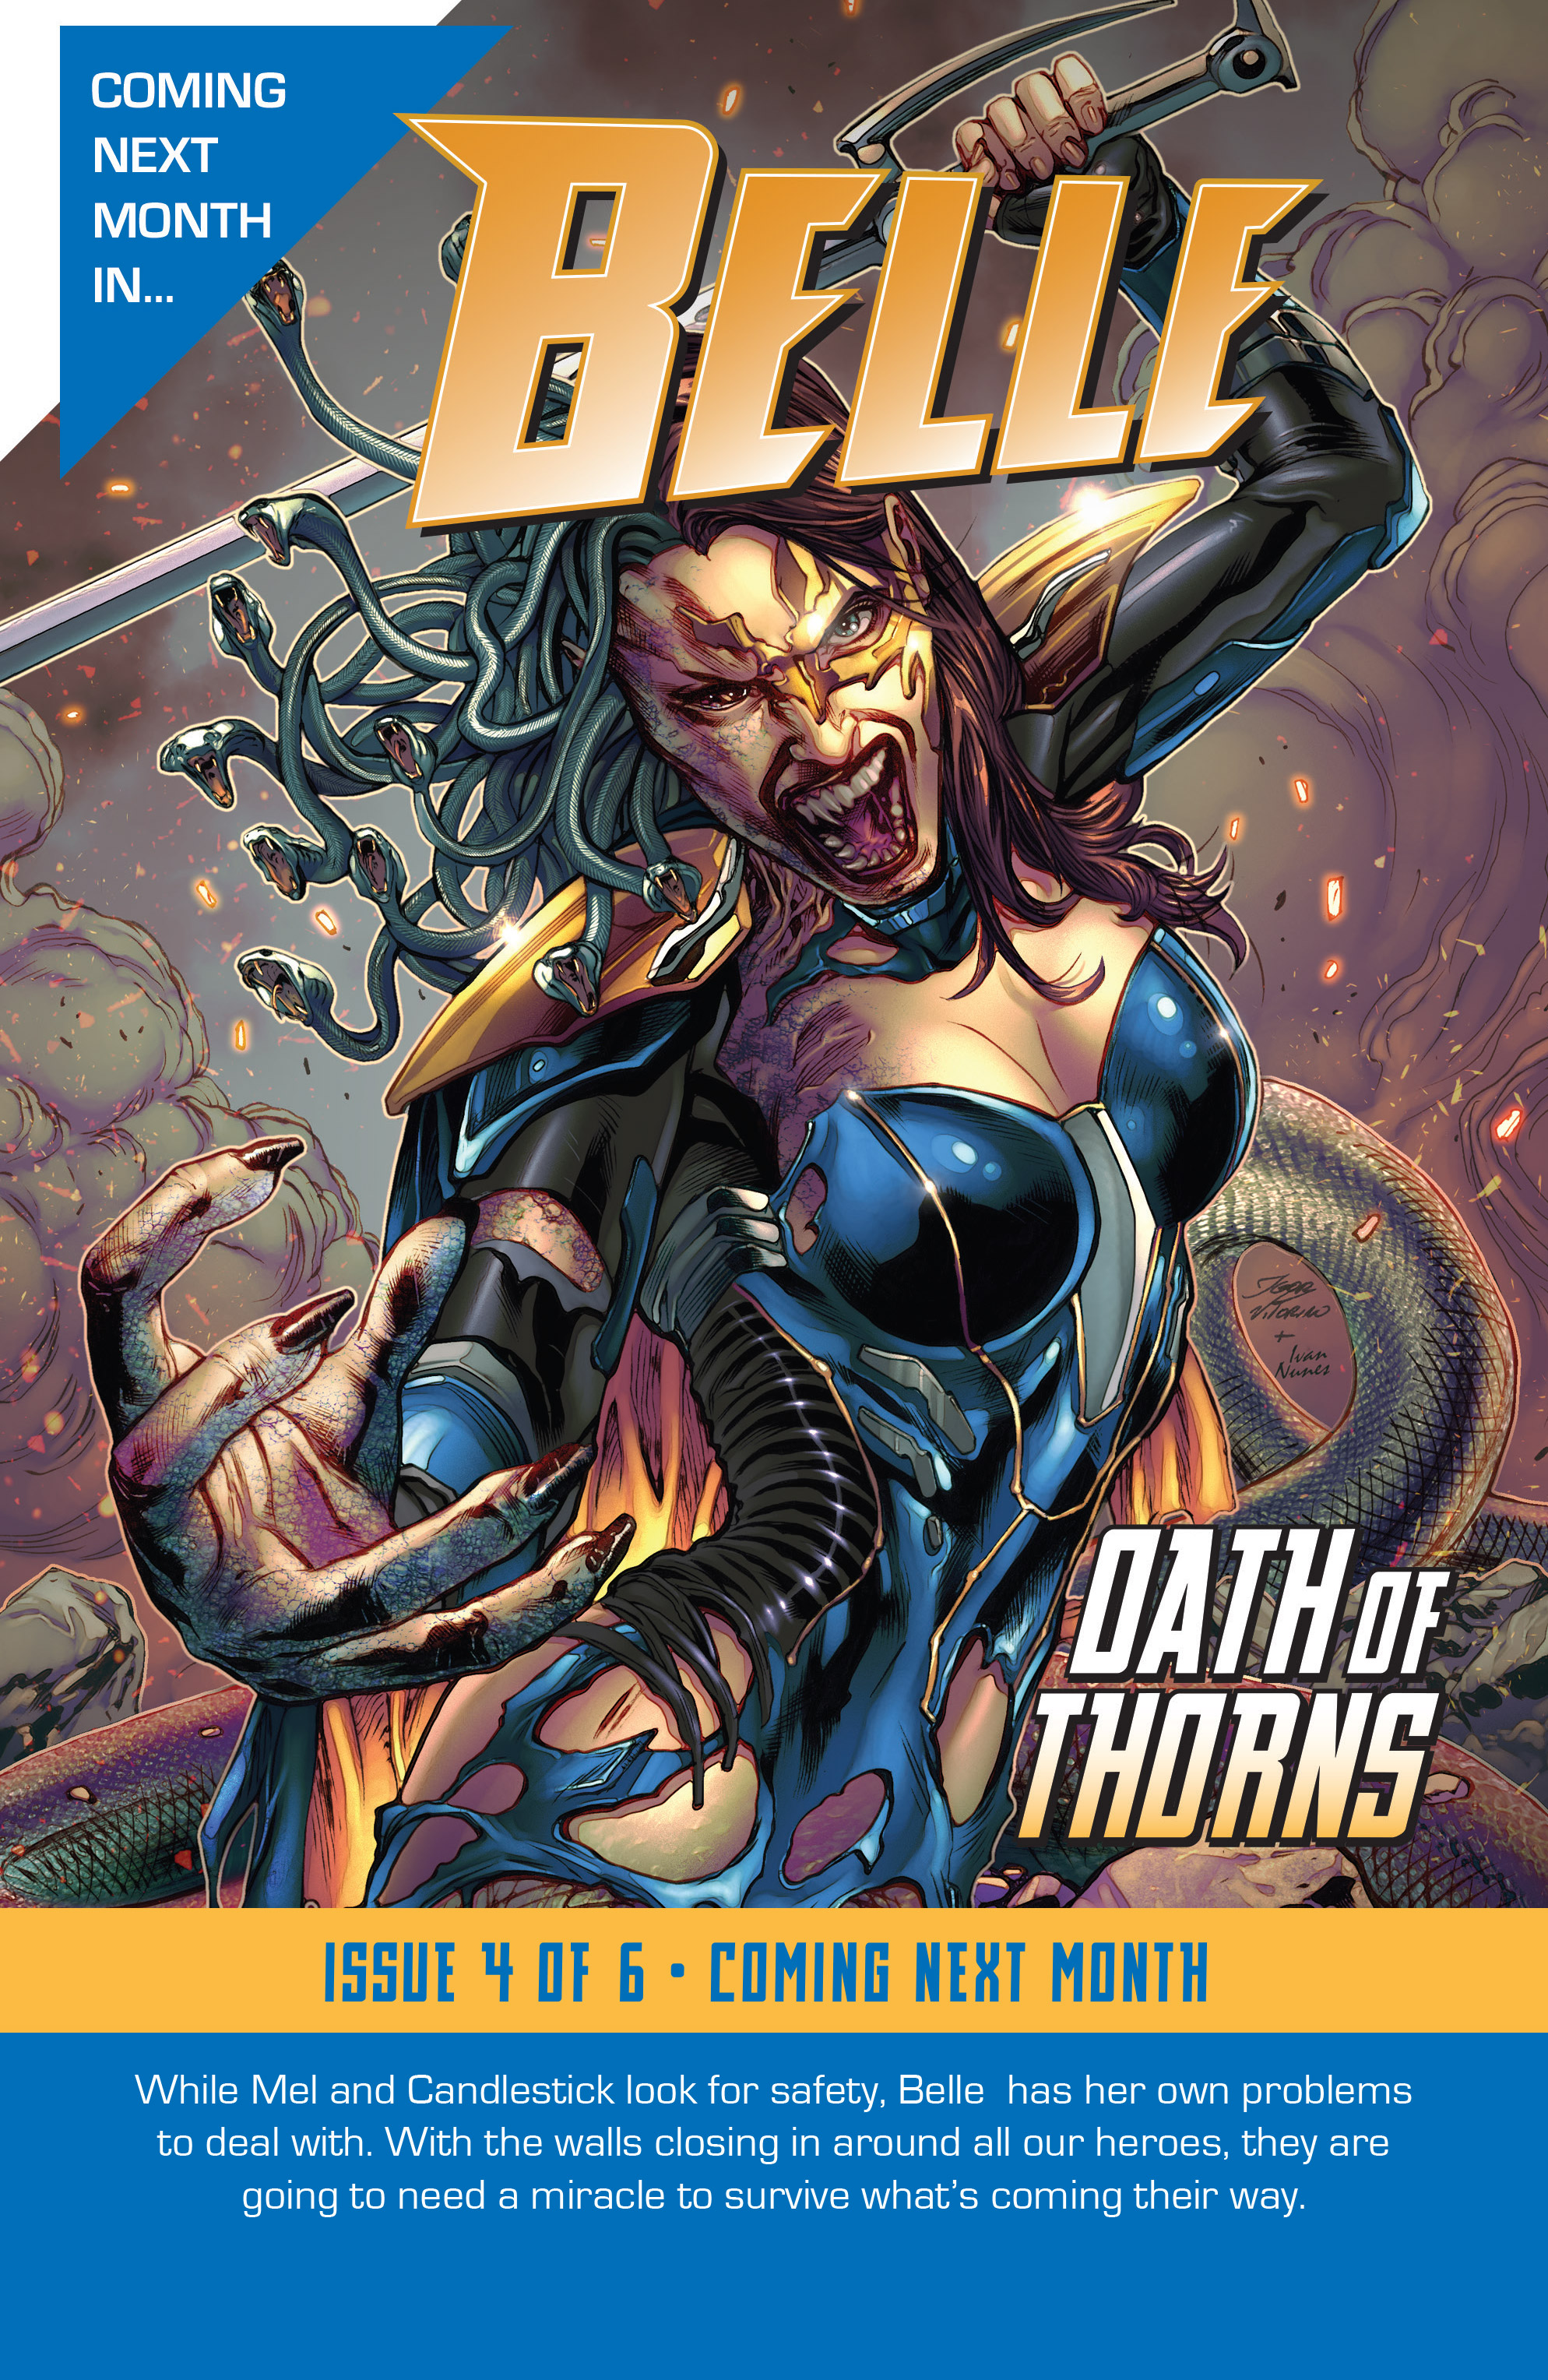 Read online Belle: Oath of Thorns comic -  Issue #3 - 25